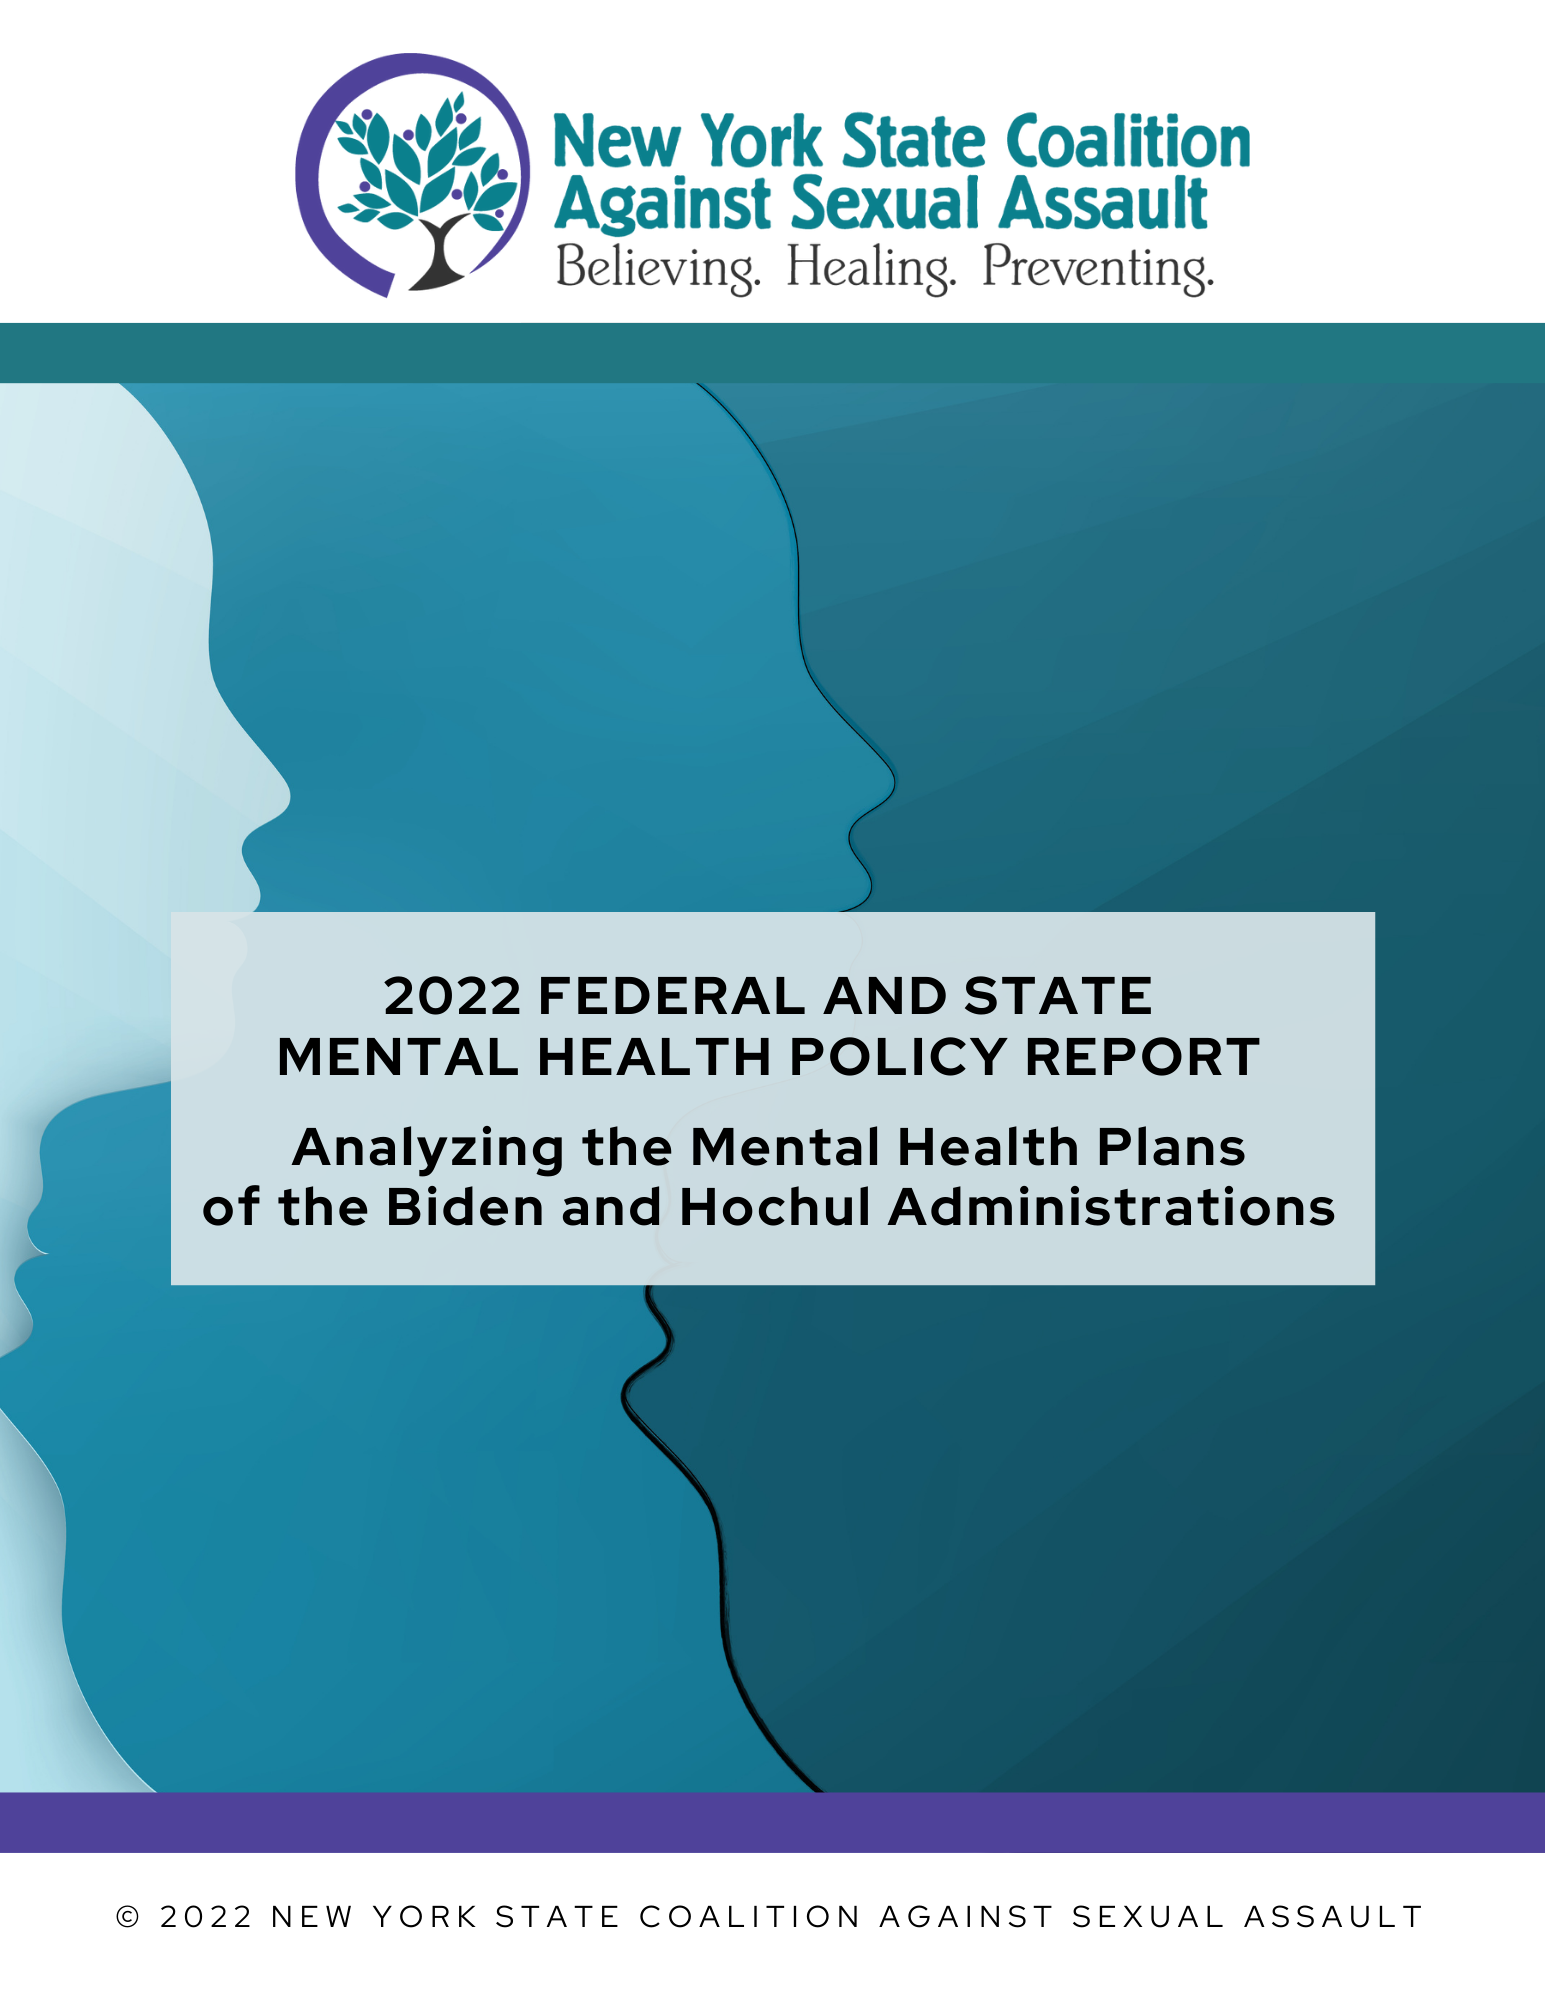 New Report: 2022 Federal and State Mental Health Policy Report